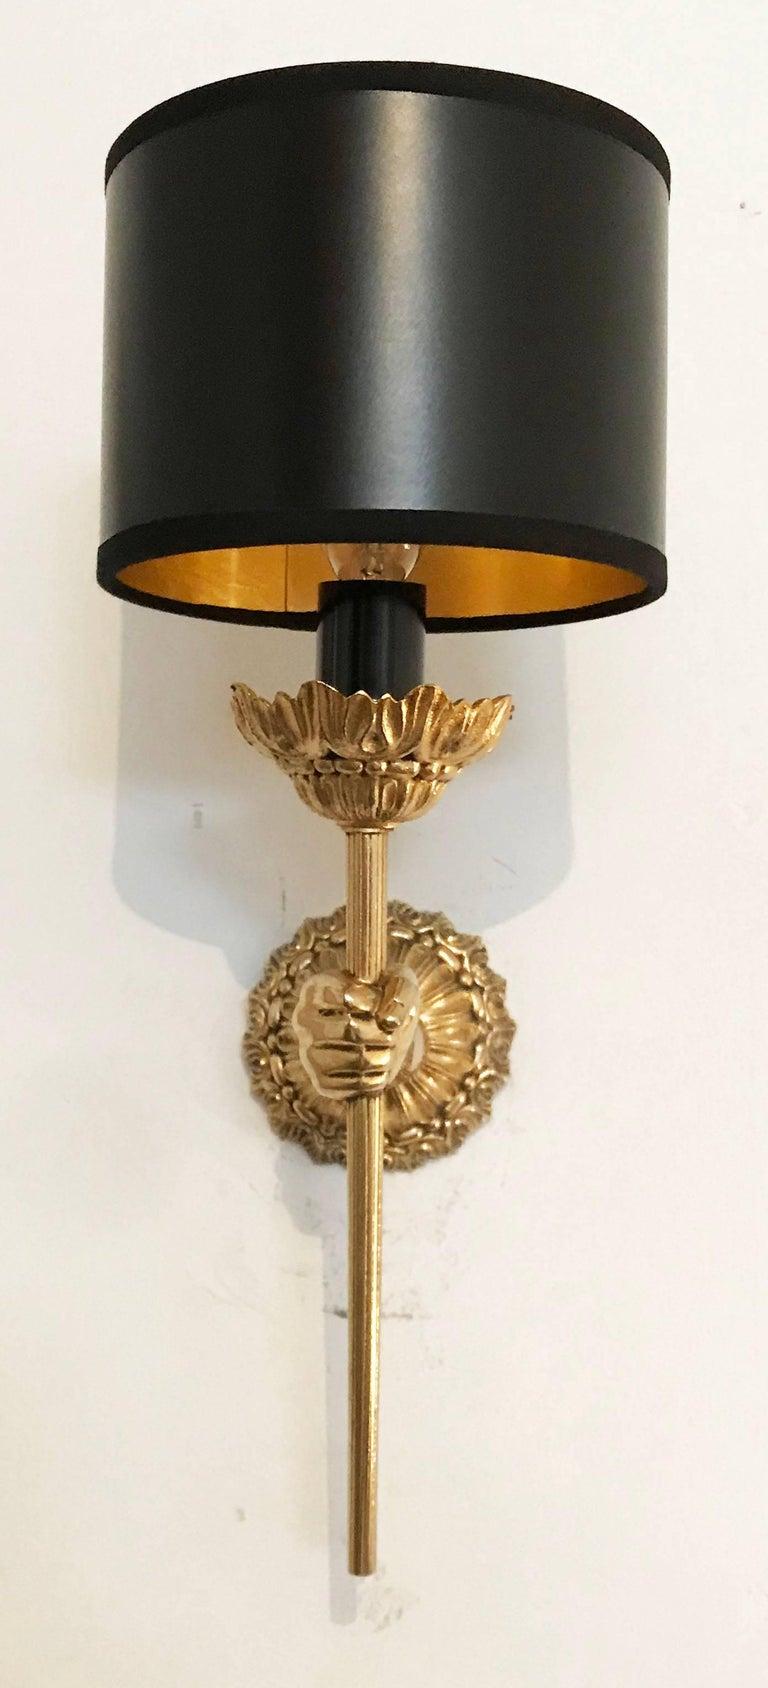 Pair of Maison Lancel neoclassical hand sconces, wall lights holding a torch.
Made in France in the 1960.
US rewired and in working condition
40 watts max bulb.
Priced by pair
Back plate: 3 inches diameter.
Custom back-plate available.